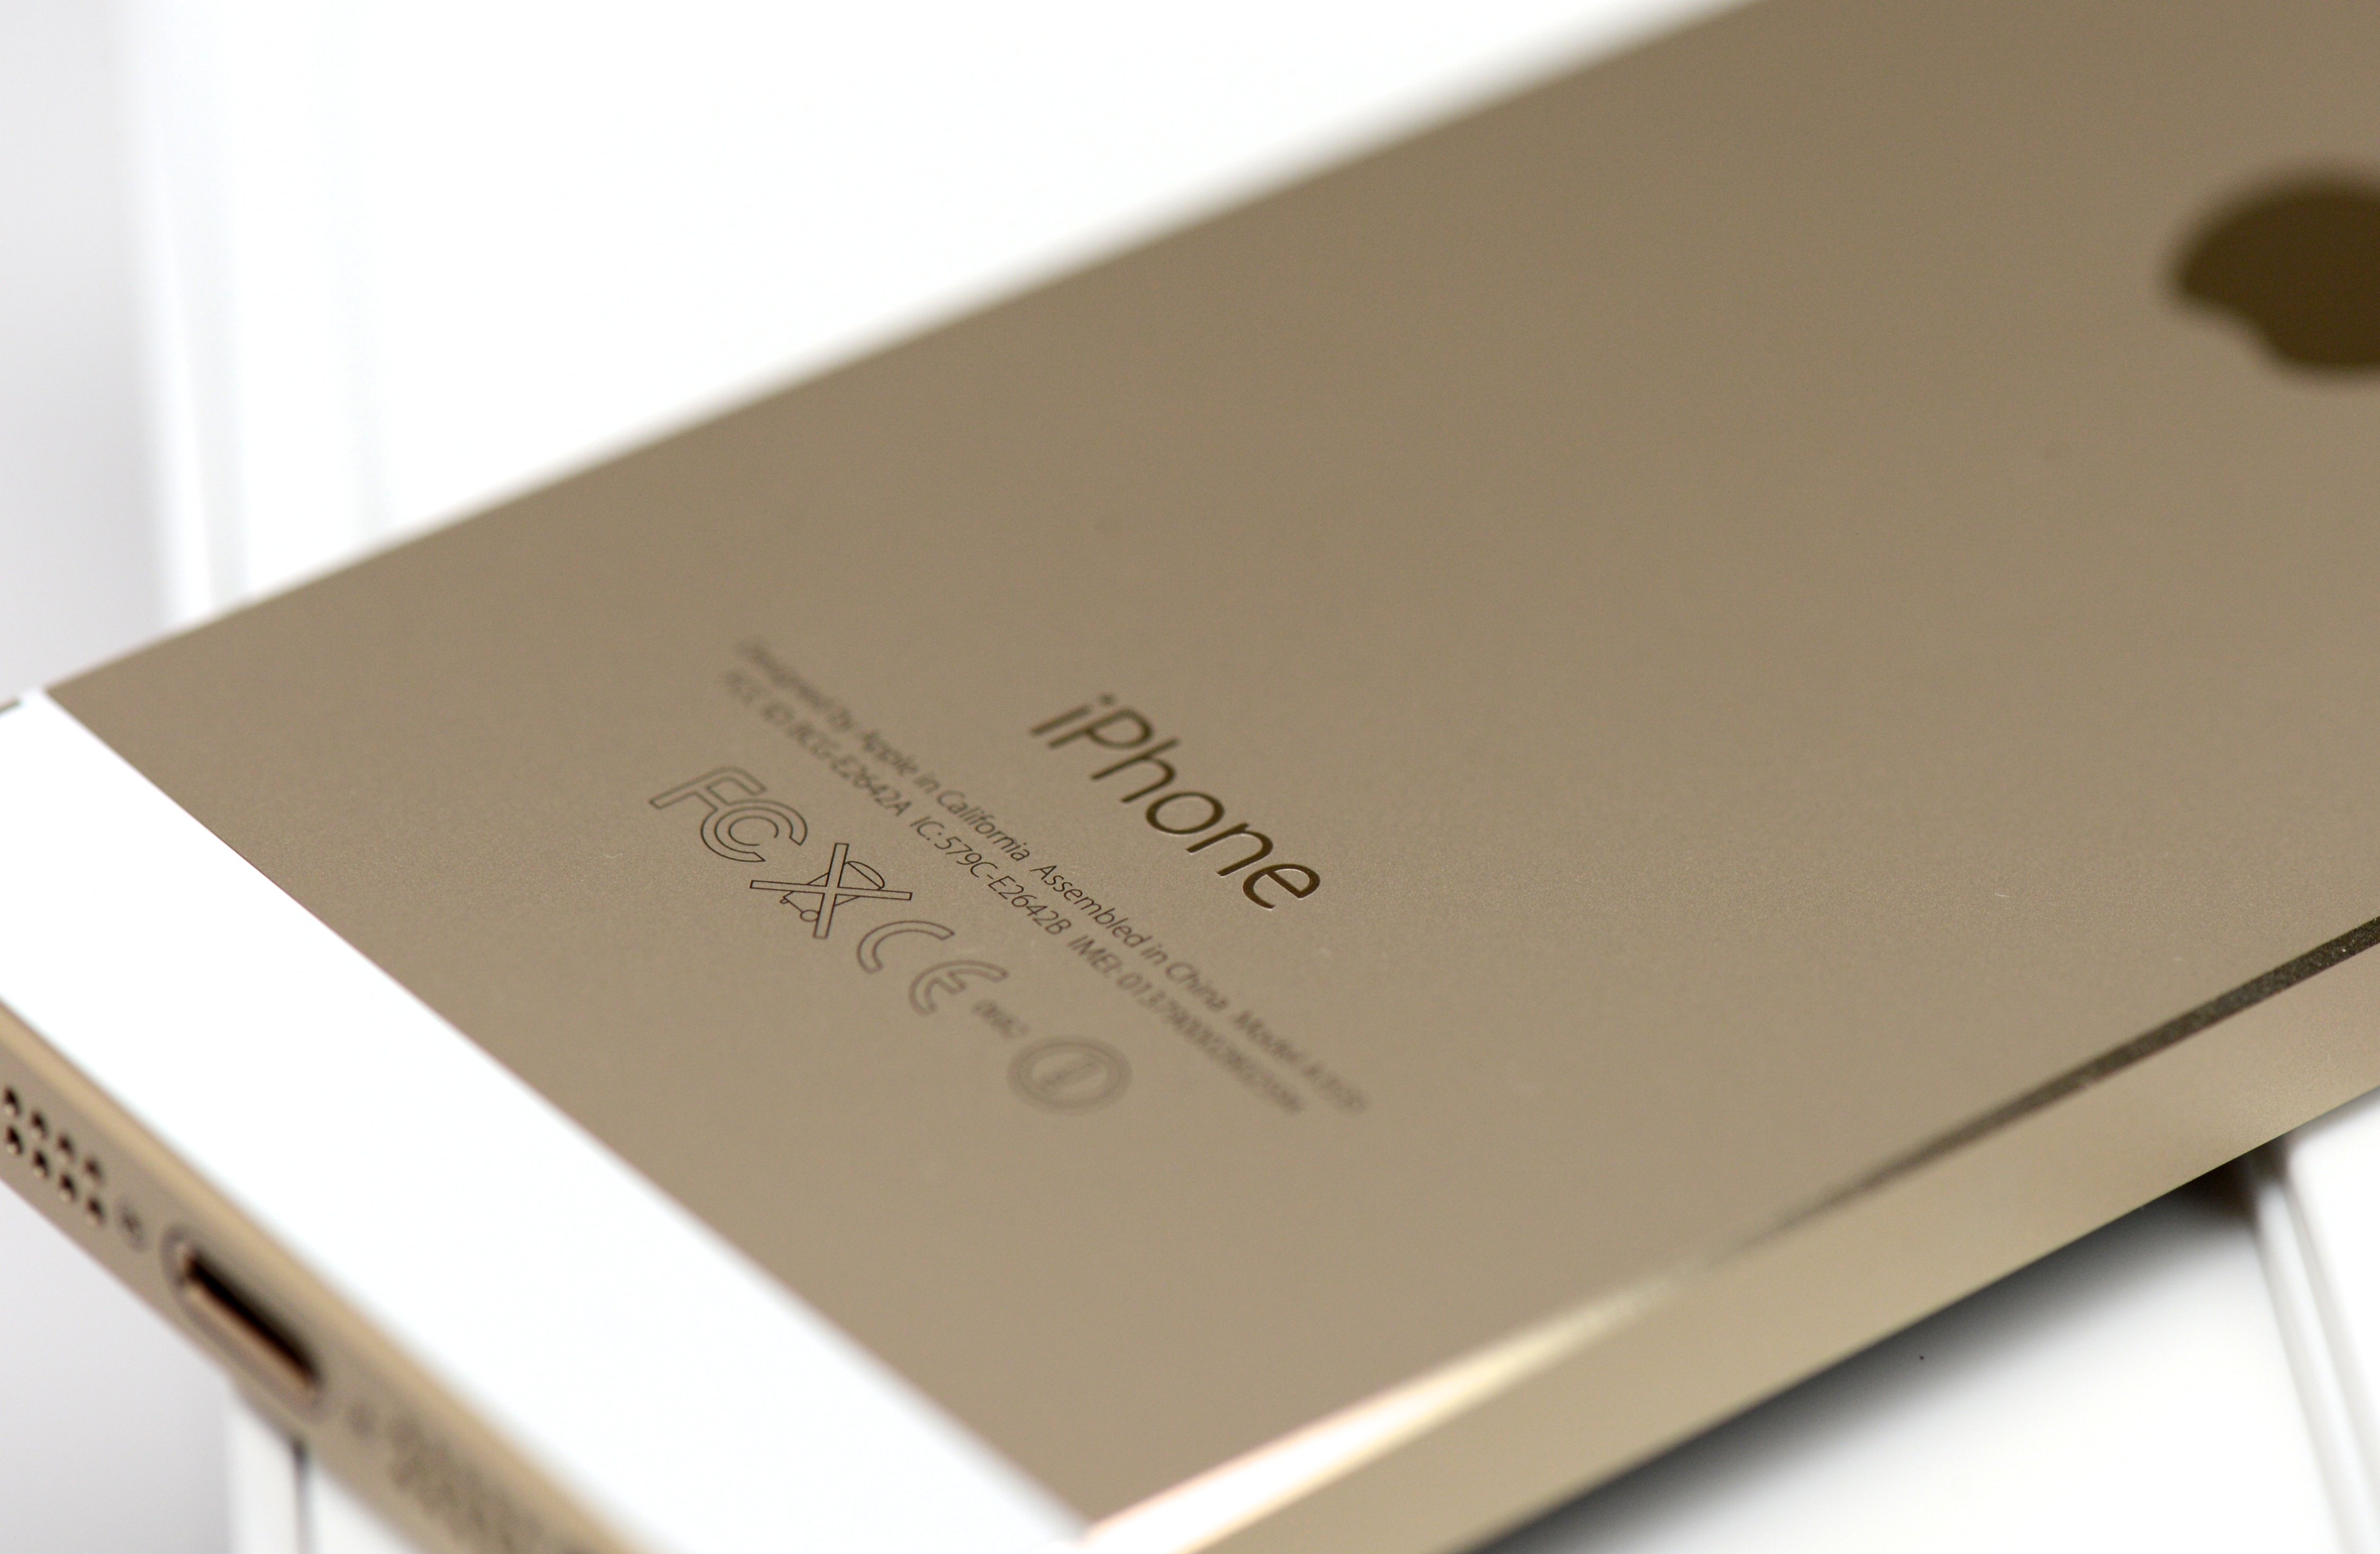 Find a gold iPhone 5s in stock faster with Apple's personal pickup option, but it won't be fast enough for some users.